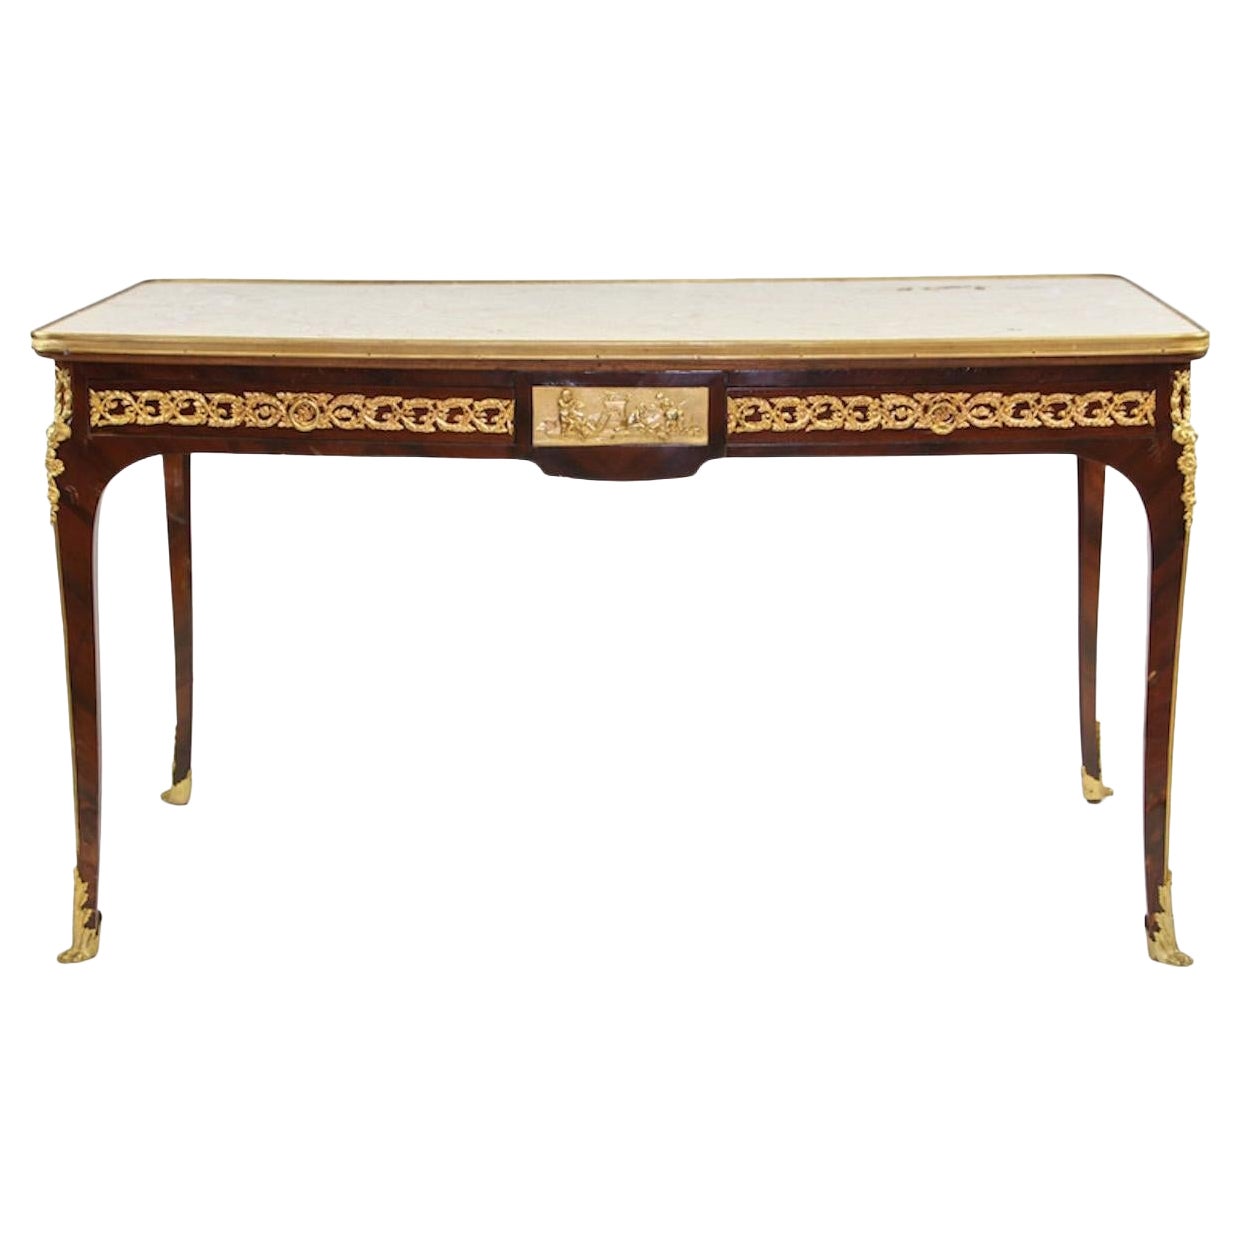 19th Century French Marble Top Writing Table/Desk with Ormolu Mounts For Sale